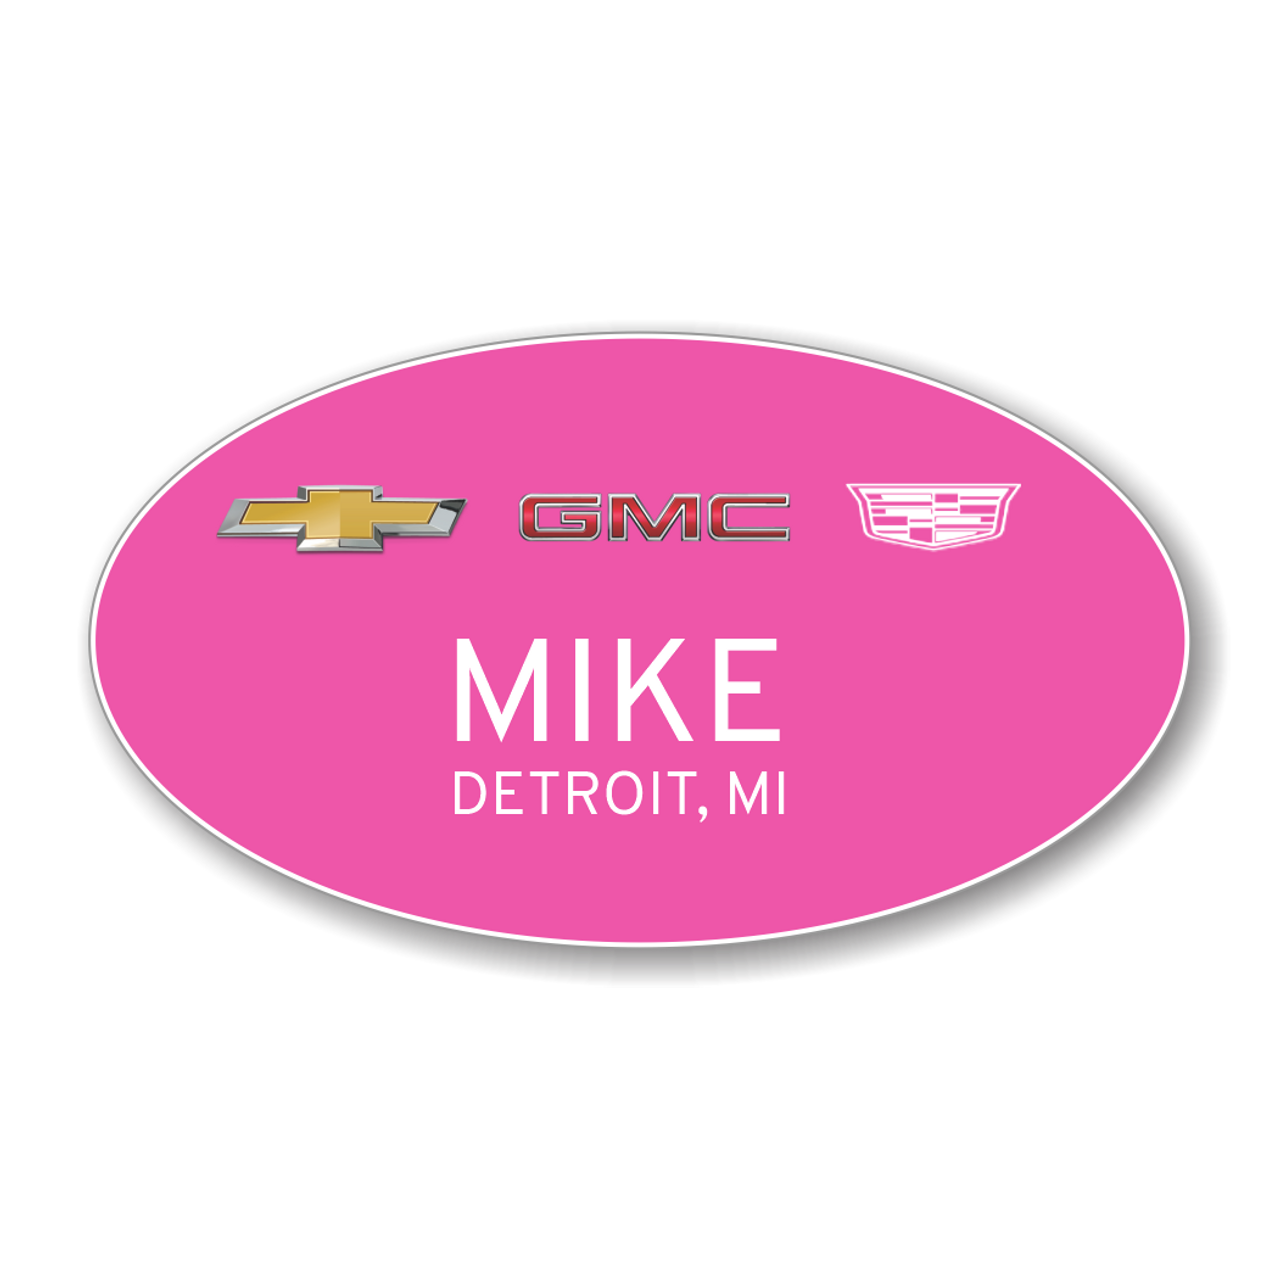 Chevrolet GMC Cadillac Pink Oval Name Badge Current Logos